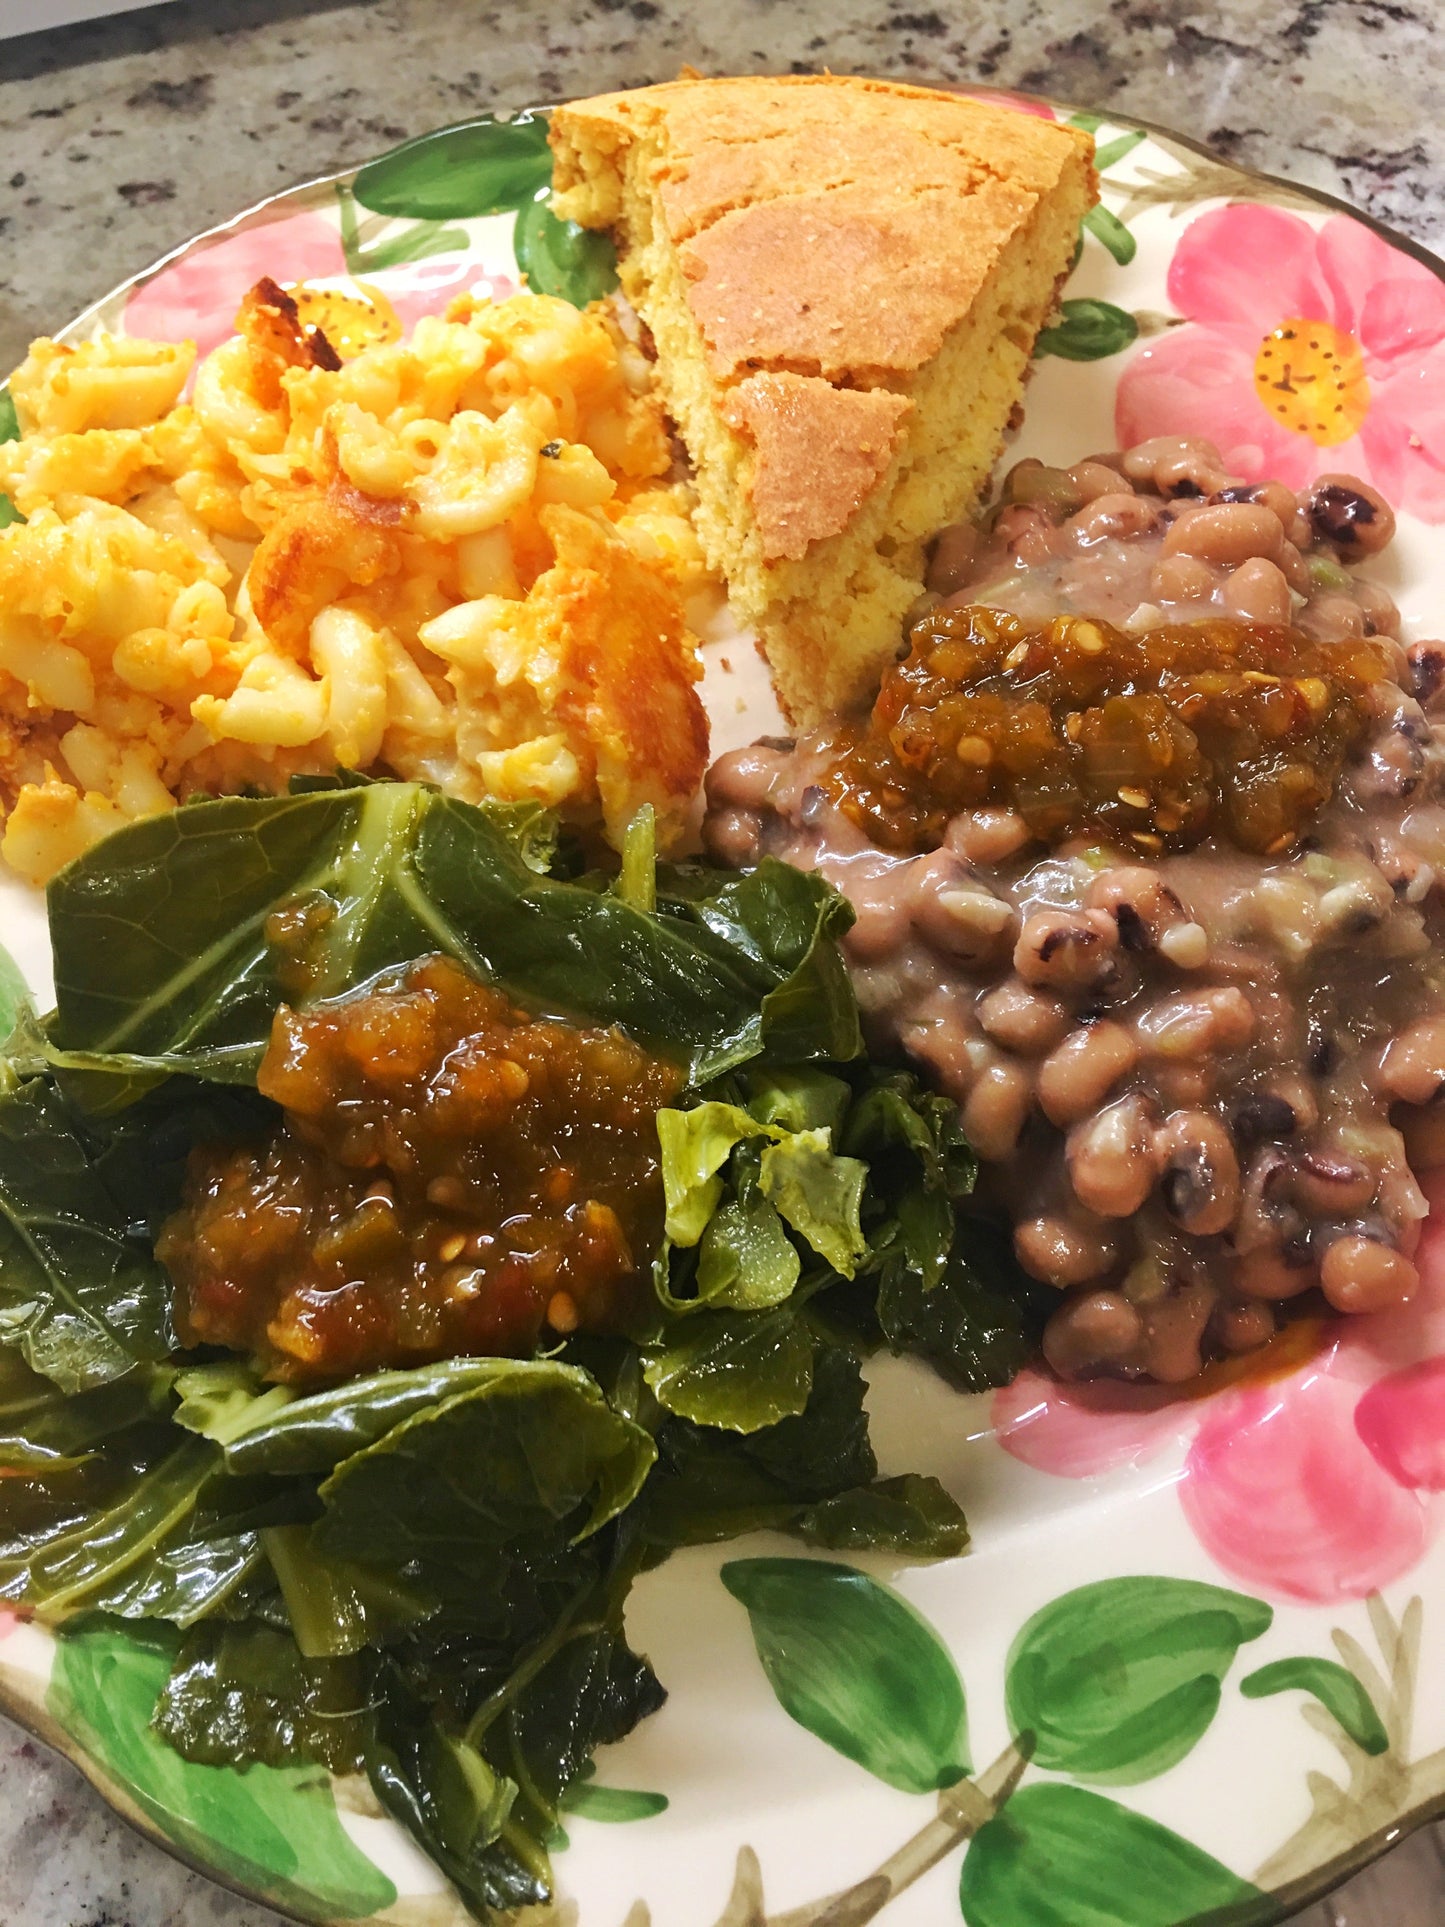 southern food of collards mac and cheese cornbread and black eyed peas with spicy pepper relish by cottage lane kichen